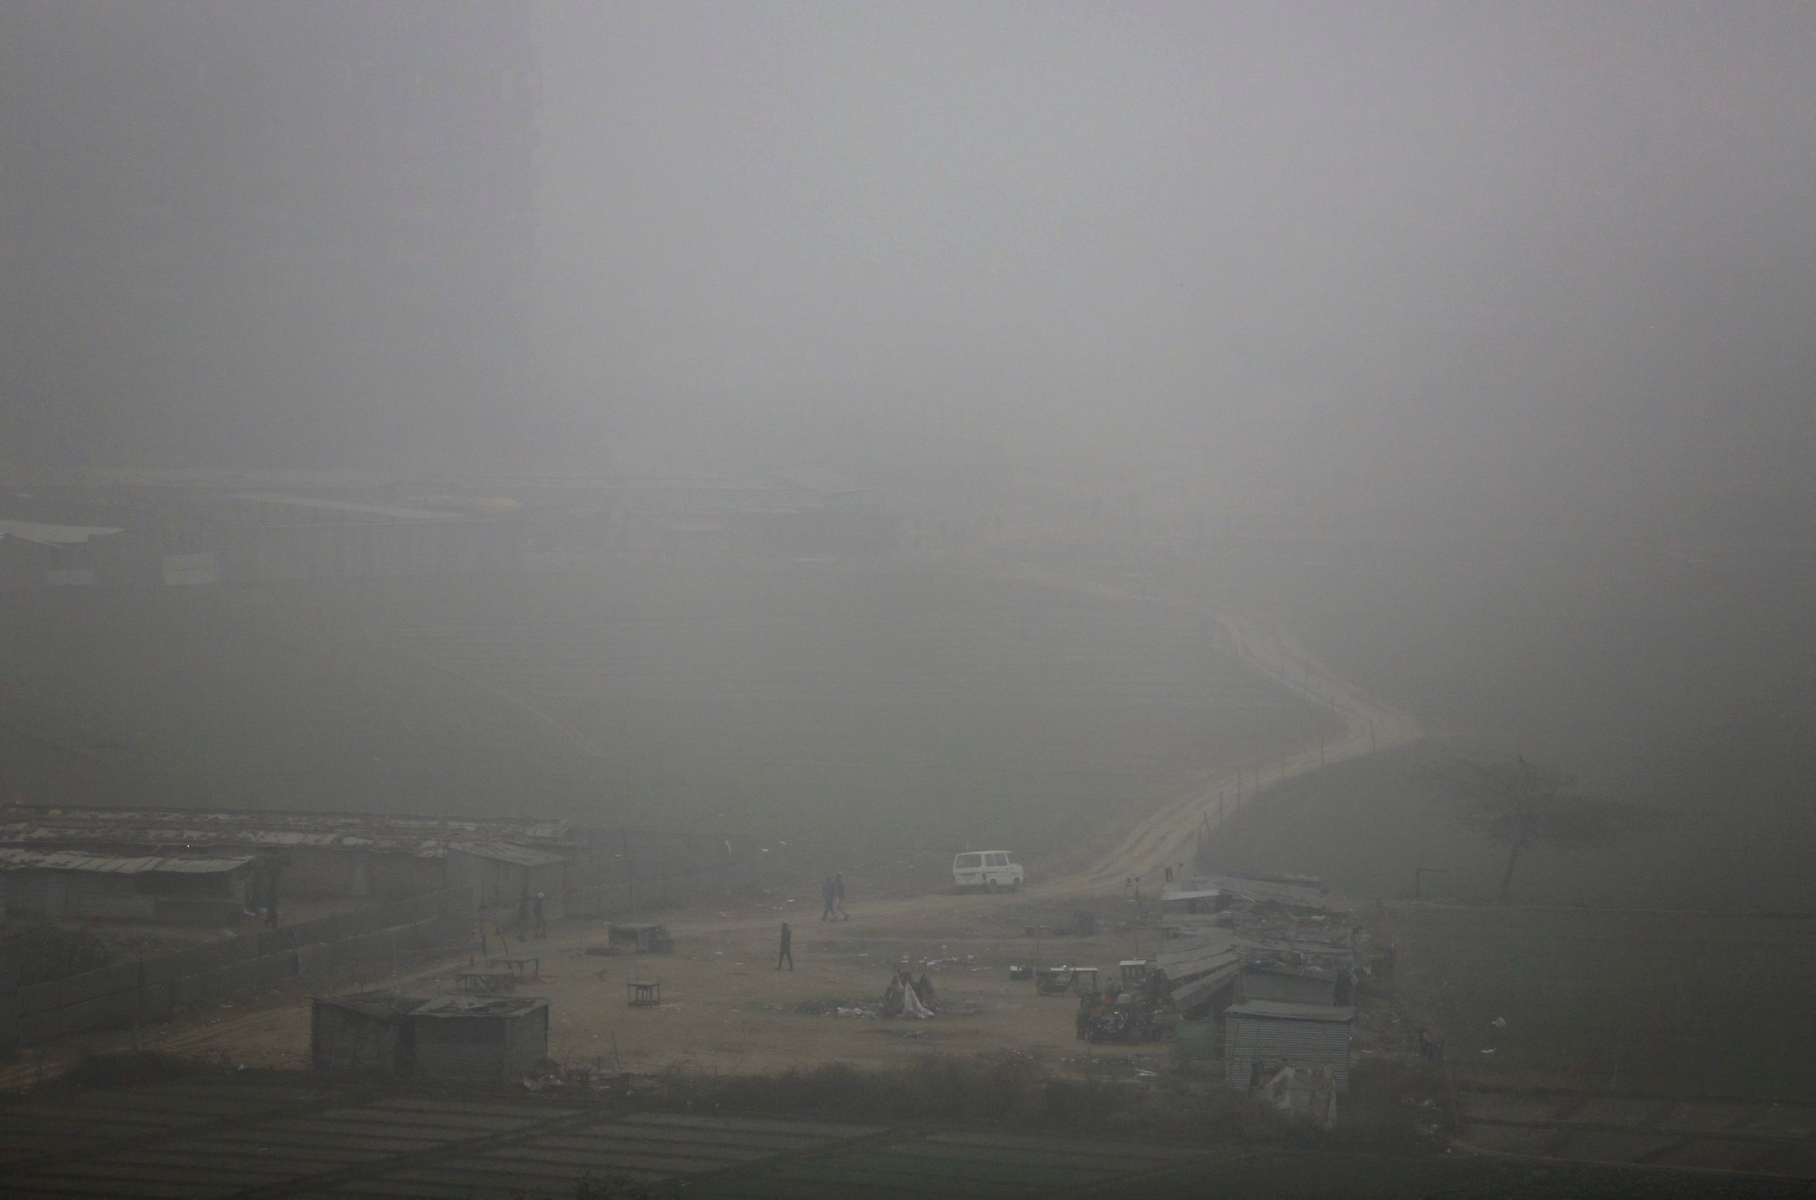 In this Saturday, Dec. 12, 2015 file photo, farmers walk near fields during a foggy and polluted morning in the outskirts of New Delhi, India. When New Delhis winter air grew so bad that a high court warned that it seems like we are living in a gas chamber, the citys top official declared that cars would be restricted starting Jan. 1,  with odd and even license plates taking turns on the roads. But police officials quickly announced they hadnt been consulted, and said theyd have trouble enforcing the rule.  (AP Photo/Altaf Qadri, File) The Week That Was In Asia Photo Gallery